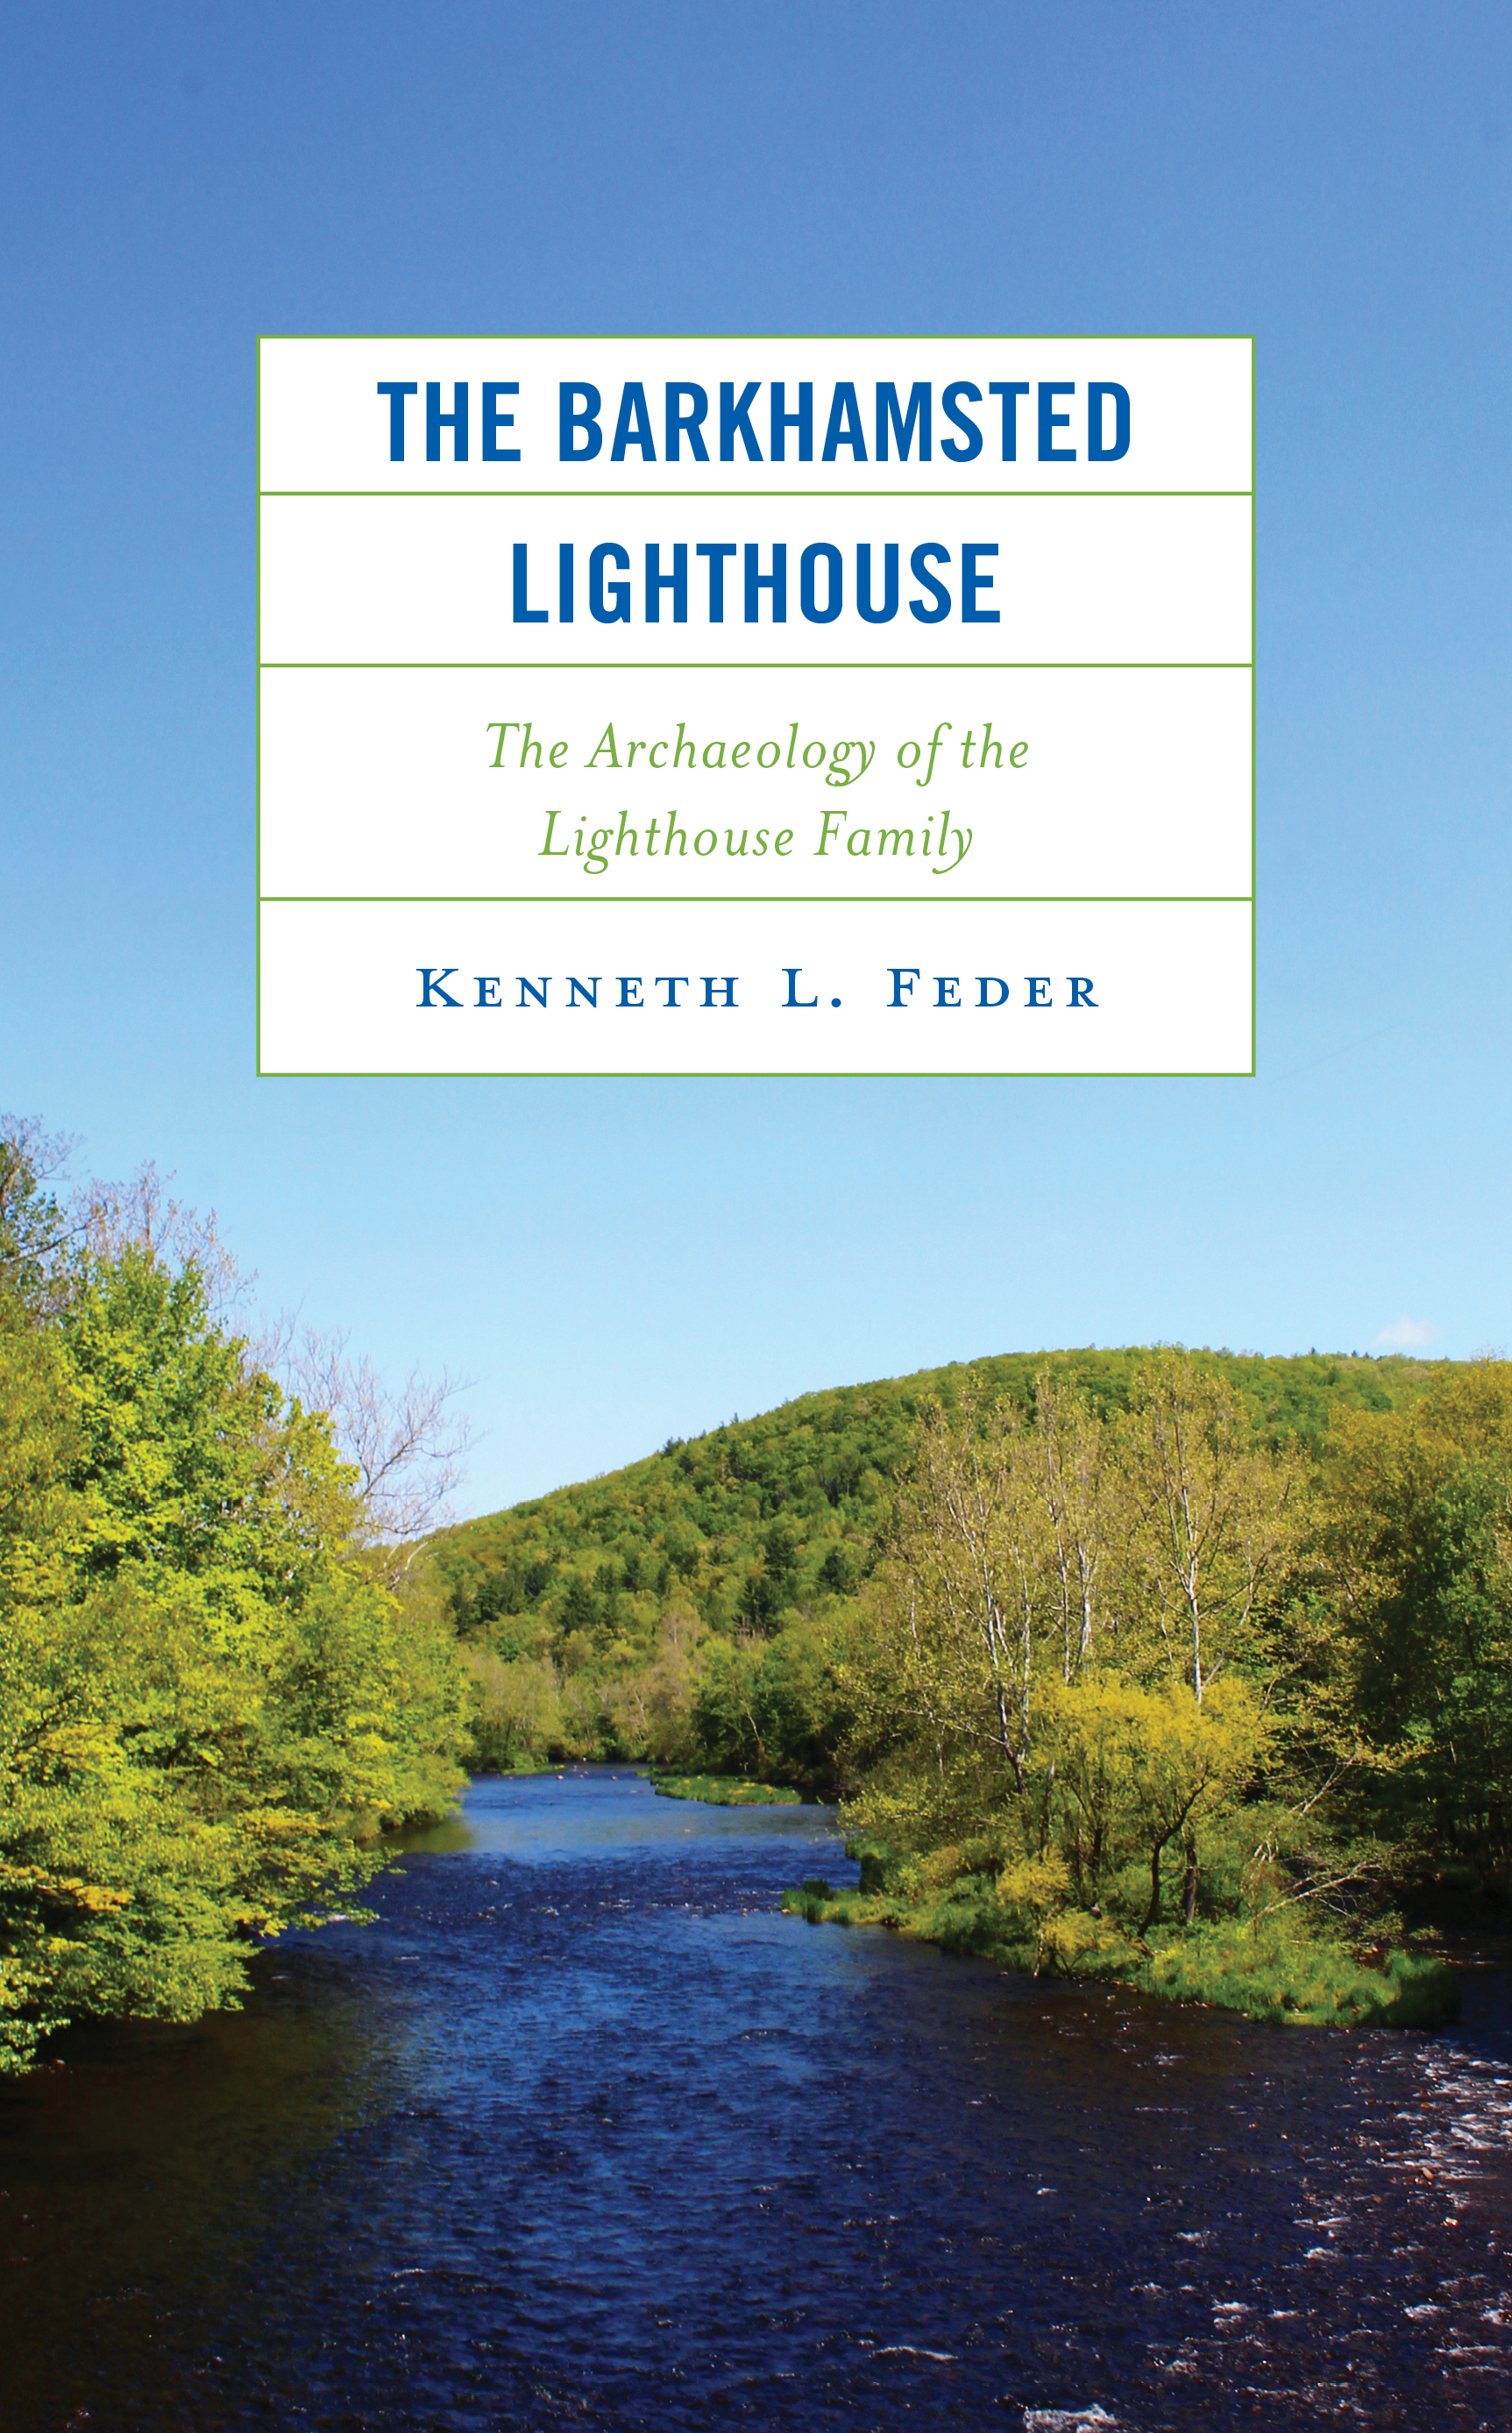 The Barkhamsted Lighthouse: The Archaeology of the Lighthouse Family